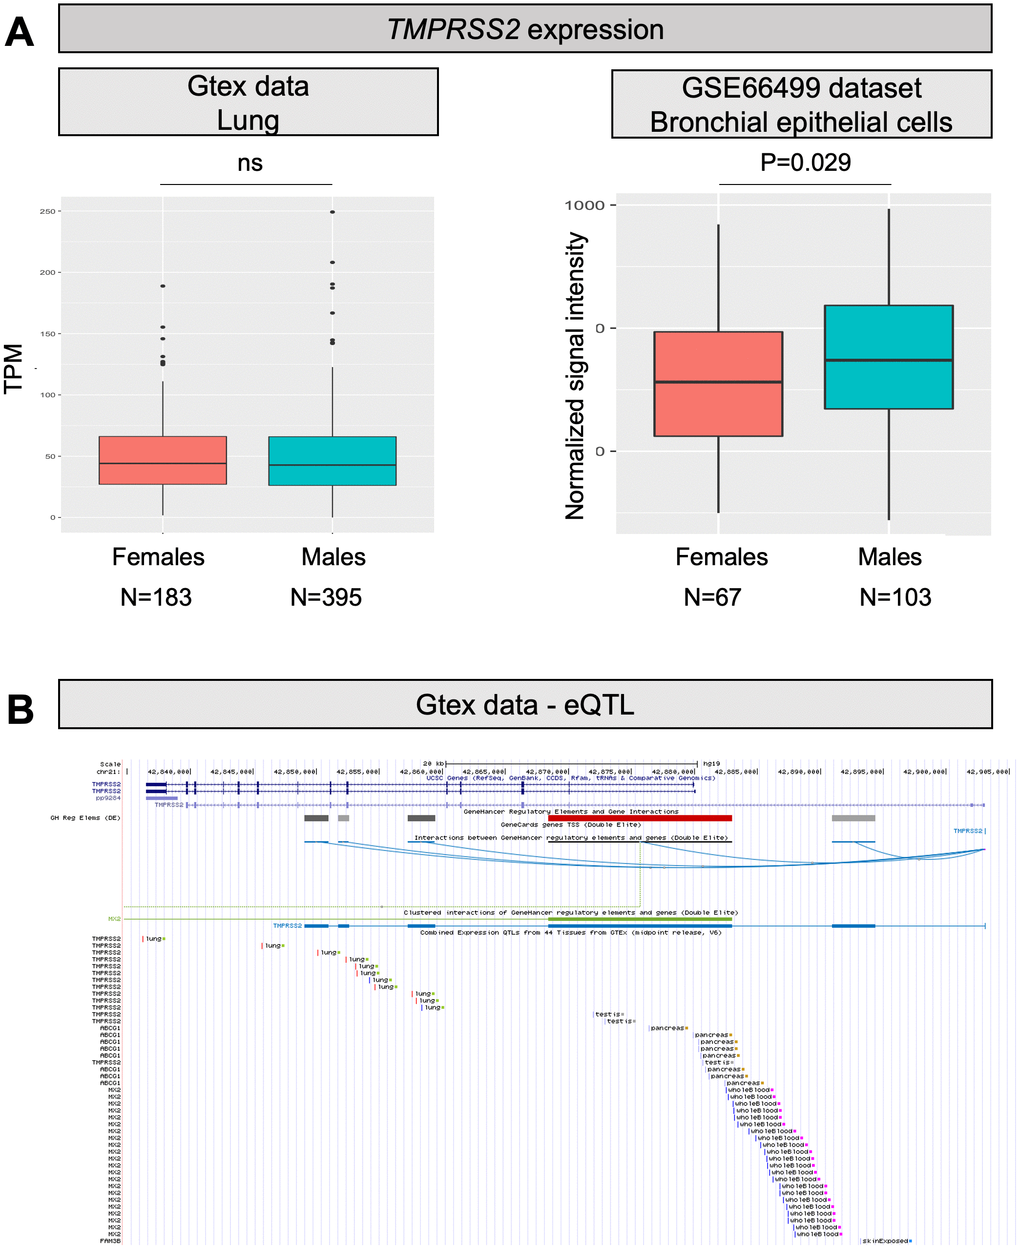 TMPRSS2 expression levels and eQTLs. (A) Both panels show TMPRSS2 mRNA expression levels in human normal lung samples stratified according to sex. On the left, data were retrieved for a total of 578 RNAseq experiments from the GTex repository. Expression levels are reported as transcripts per kilobase million (TPM). On the right, data were collected for a total of 170 microarray experiments from the GEO database. Expression levels are reported as normalized signal intensities. P values were calculated by using either the Kruskal-Wallis or the student t test. (B) Screenshot from the UCSC Genome browser (http://genome.ucsc.edu/; GRCh37/hg19) highlighting the TMPRSS2 region (coordinates chr21: 42,835,000-42,905,000). The panel shows the following tracks: i) the ruler with the scale at the genomic level; ii) chromosome 21 nucleotide numbering; iii) the UCSC RefSeq track; iv) enhancers (grey and red bars) from GeneHancer database; v) interactions (curved lines) connecting GeneHancer regulatory elements and genes: all curved lines converge towards the androgen-responsive enhancer for the TMPRSS2 gene described by Clinckemalie and colleagues [29].